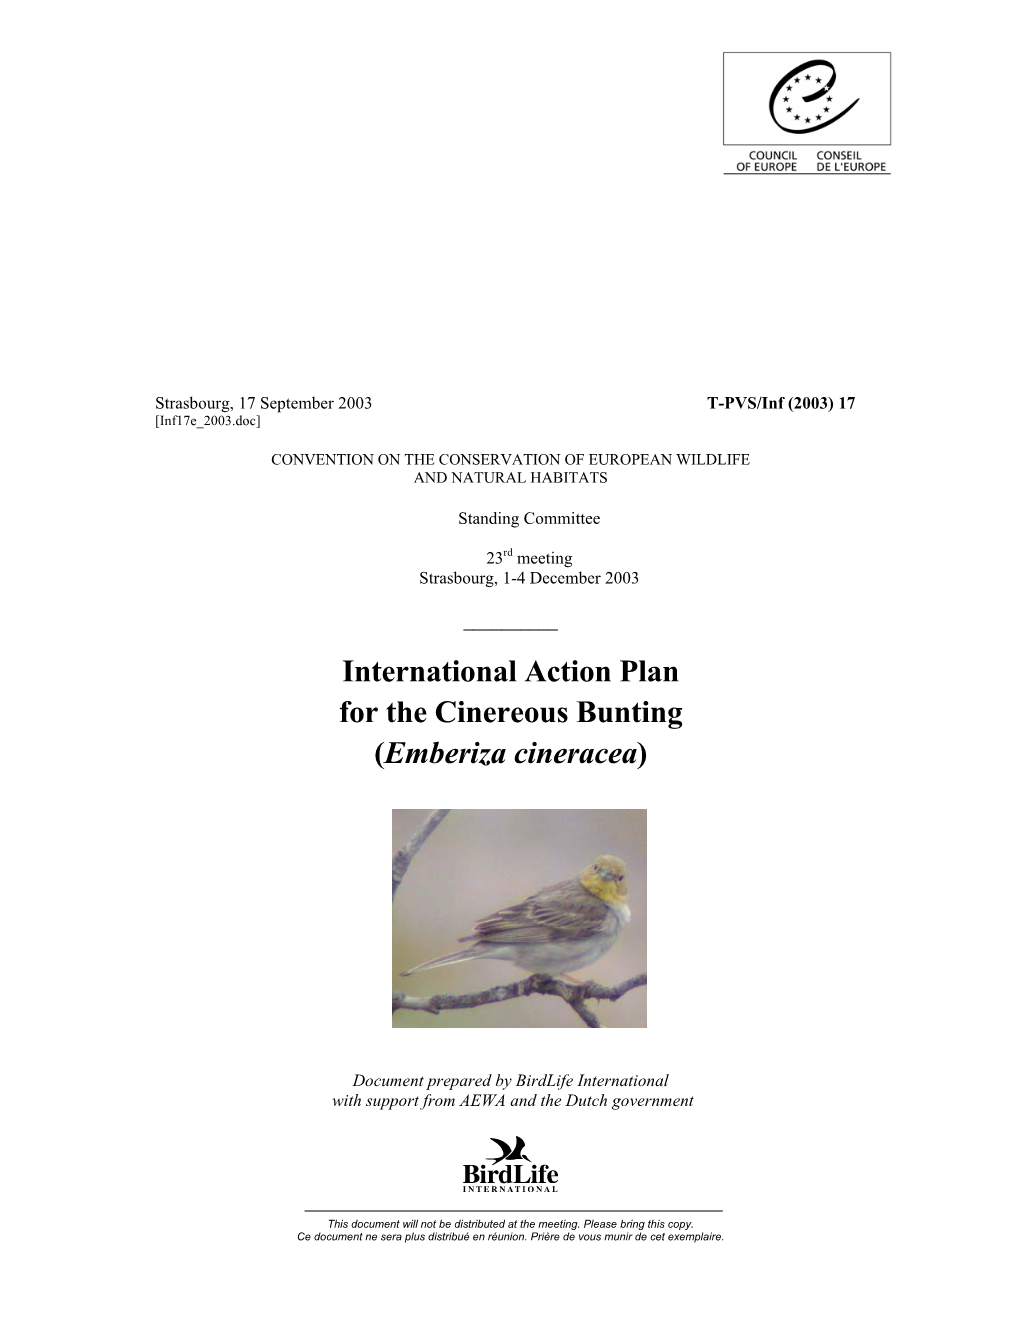 International Action Plan for the Cinereous Bunting (Emberiza Cineracea)